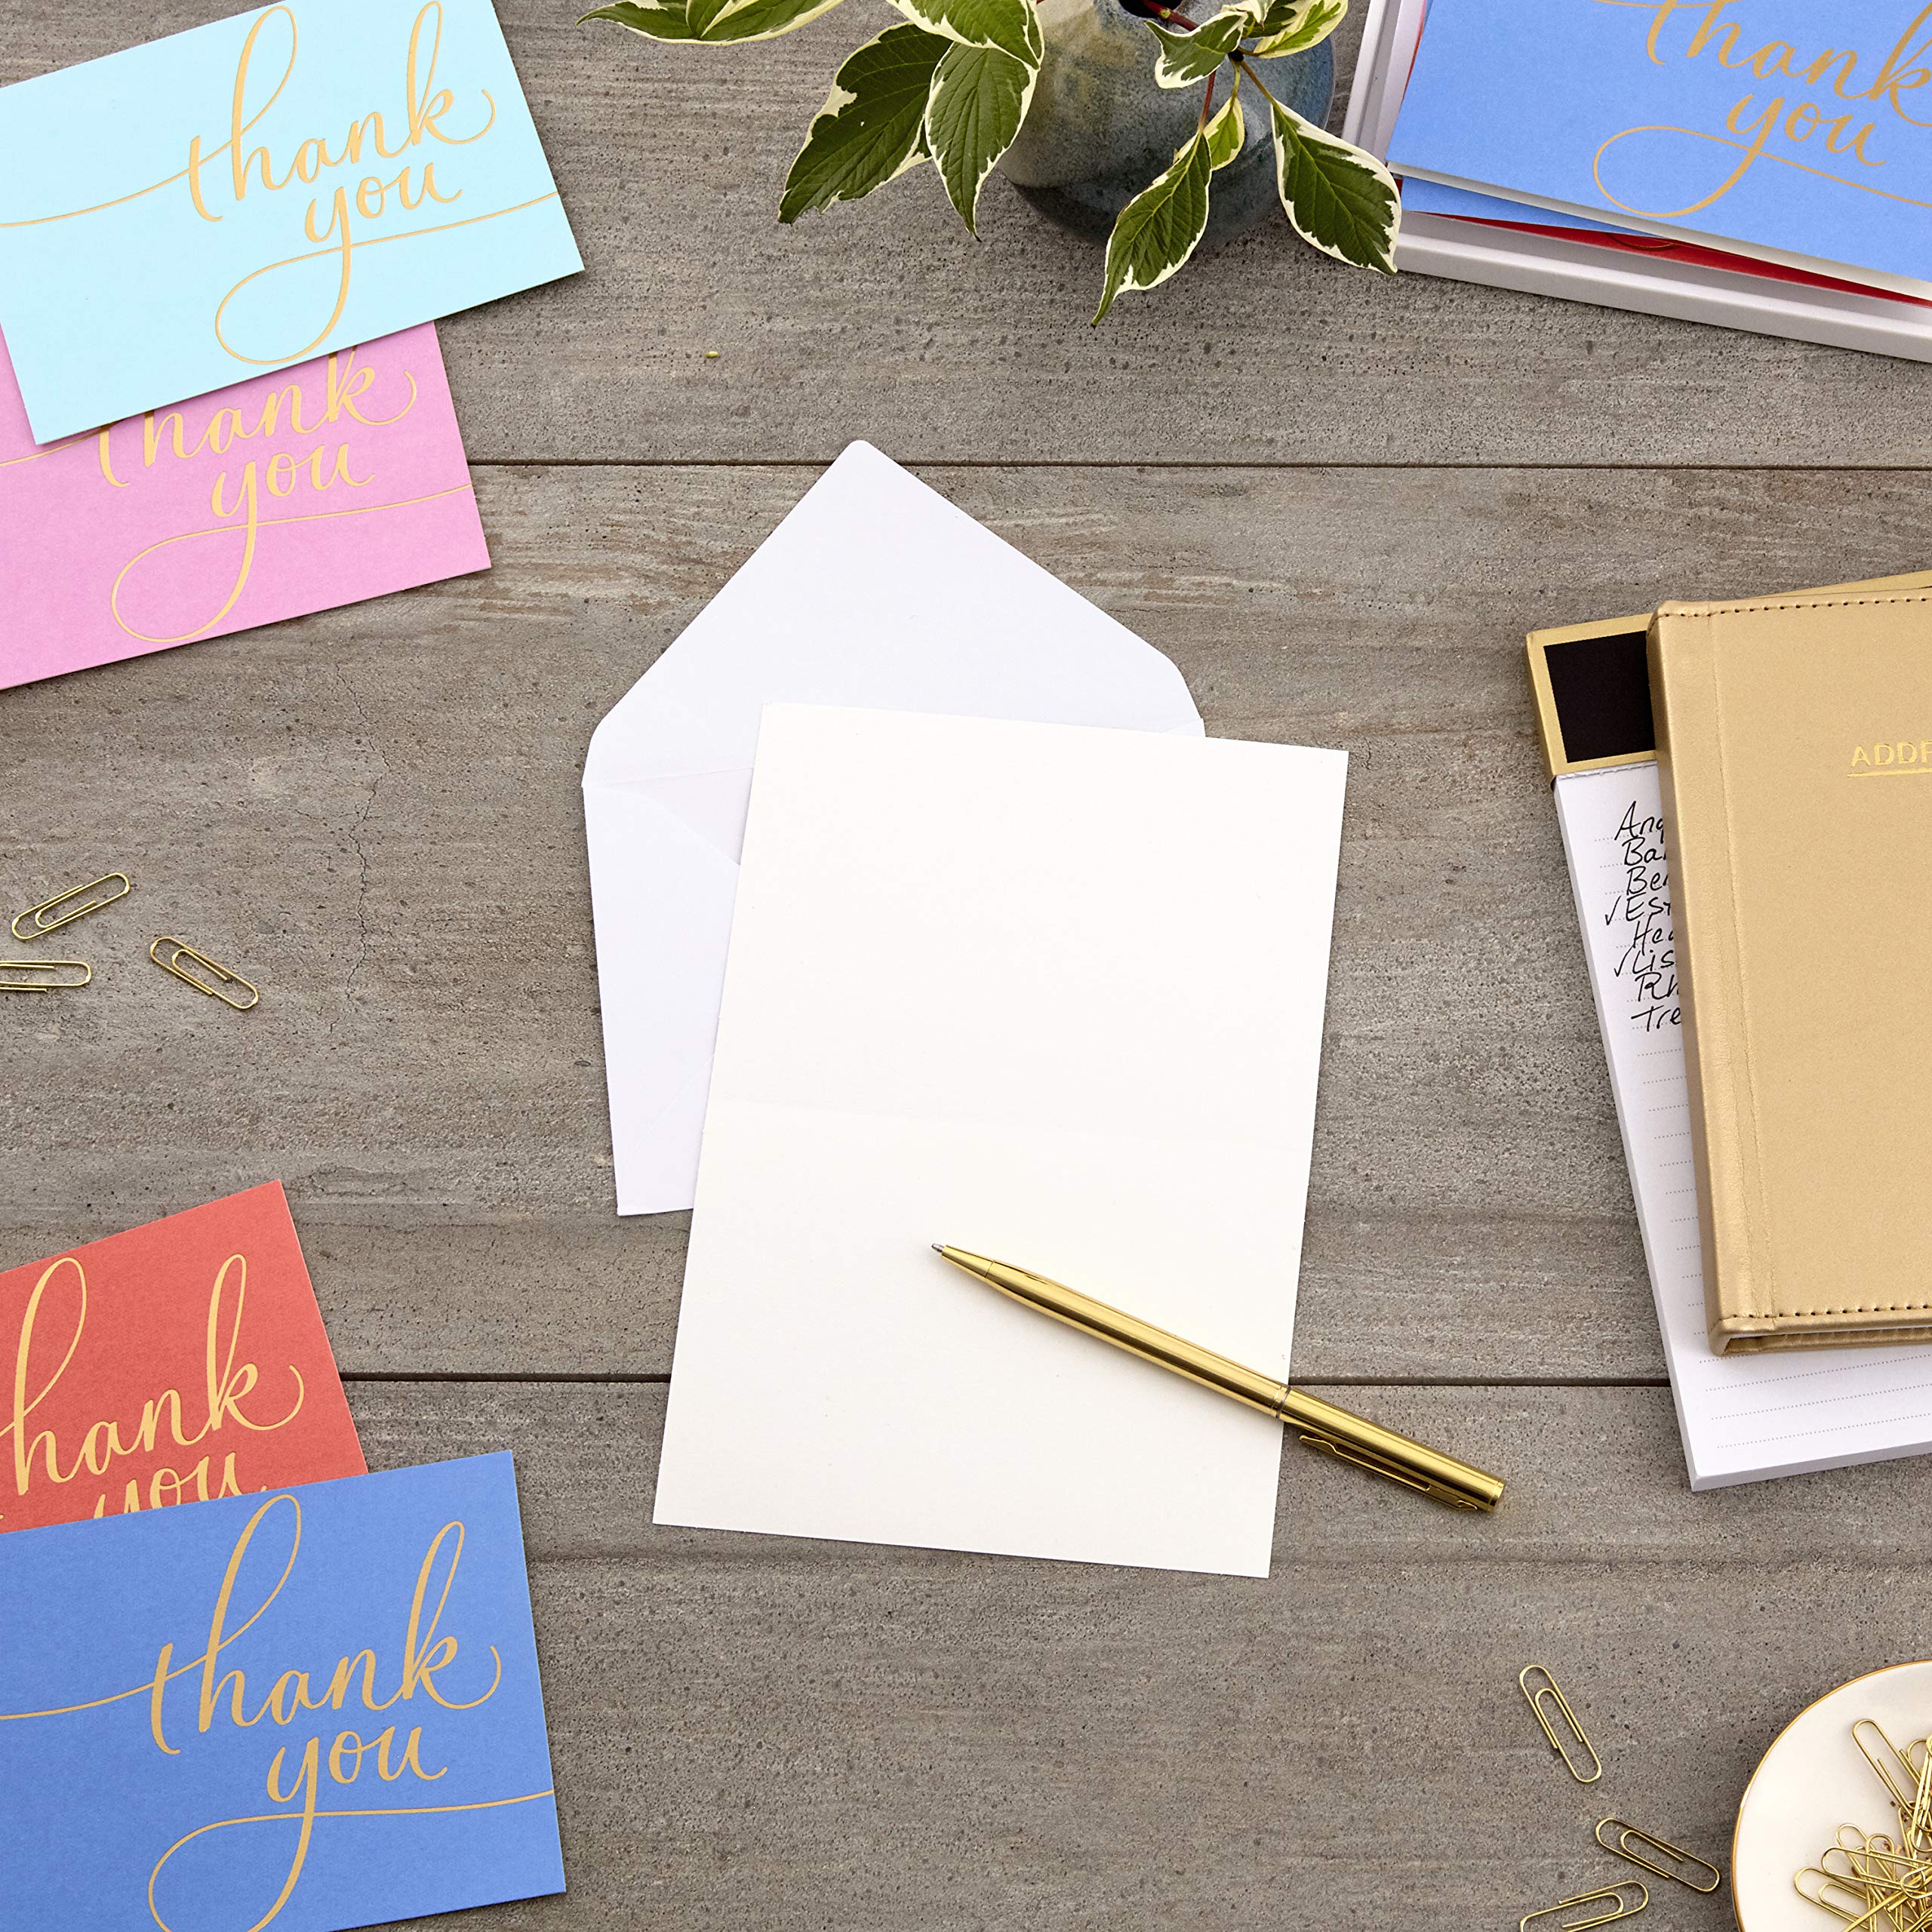 Hallmark Thank You Cards Assortment, Gold Foil Script (40 Thank You Notes with Envelopes) & Thank You Cards (Silver Foil Script, 40 Thank You Notes and Envelopes)